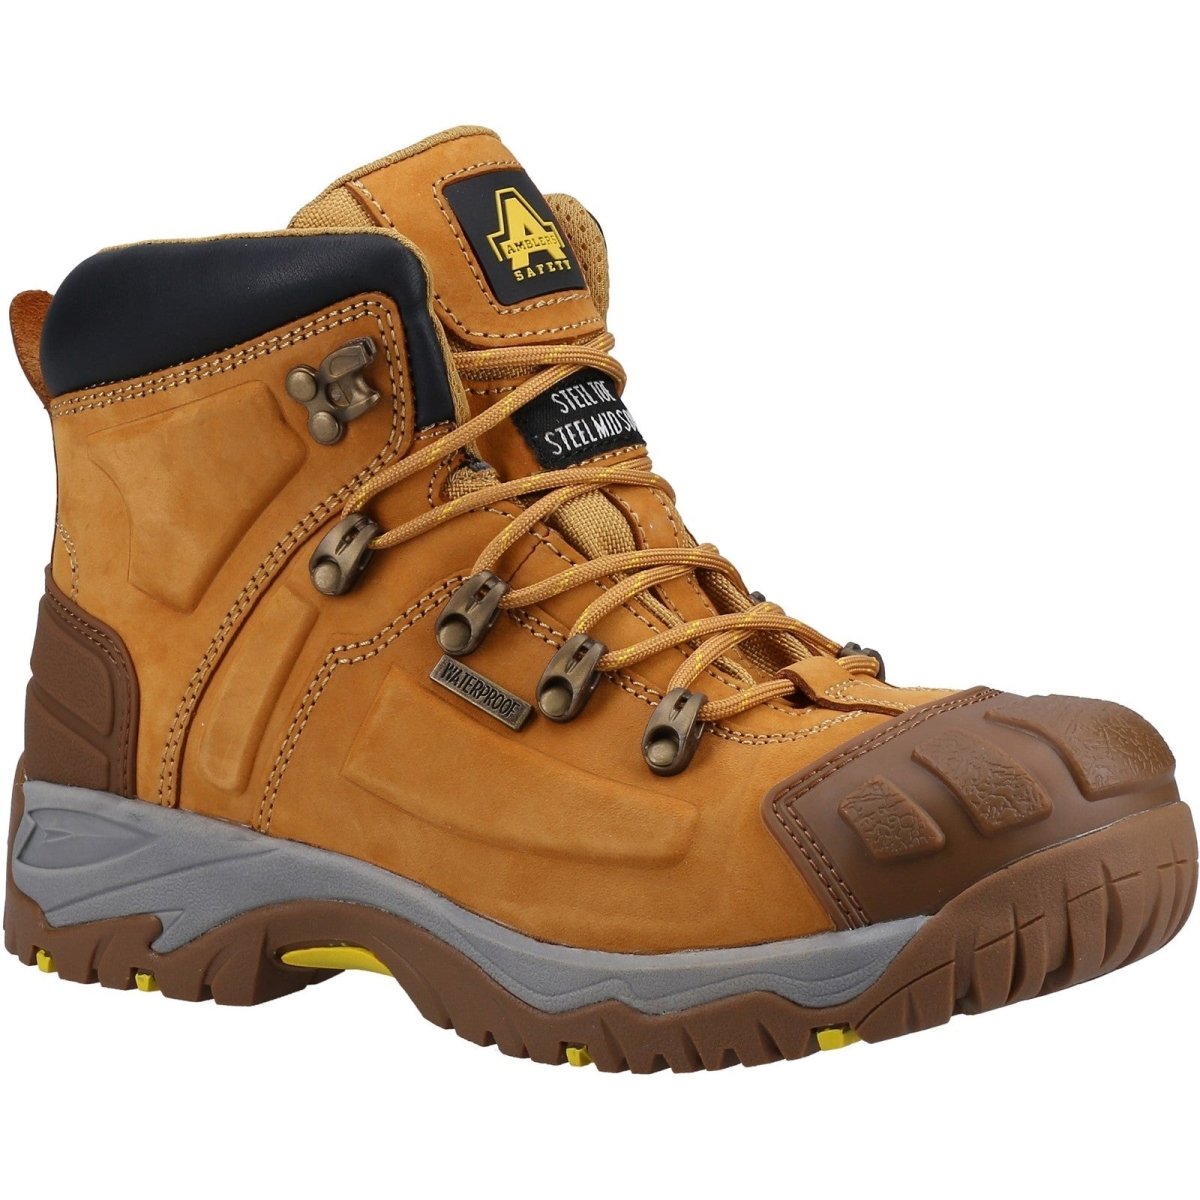 Amblers Safety AS33 Boots - Shoe Store Direct